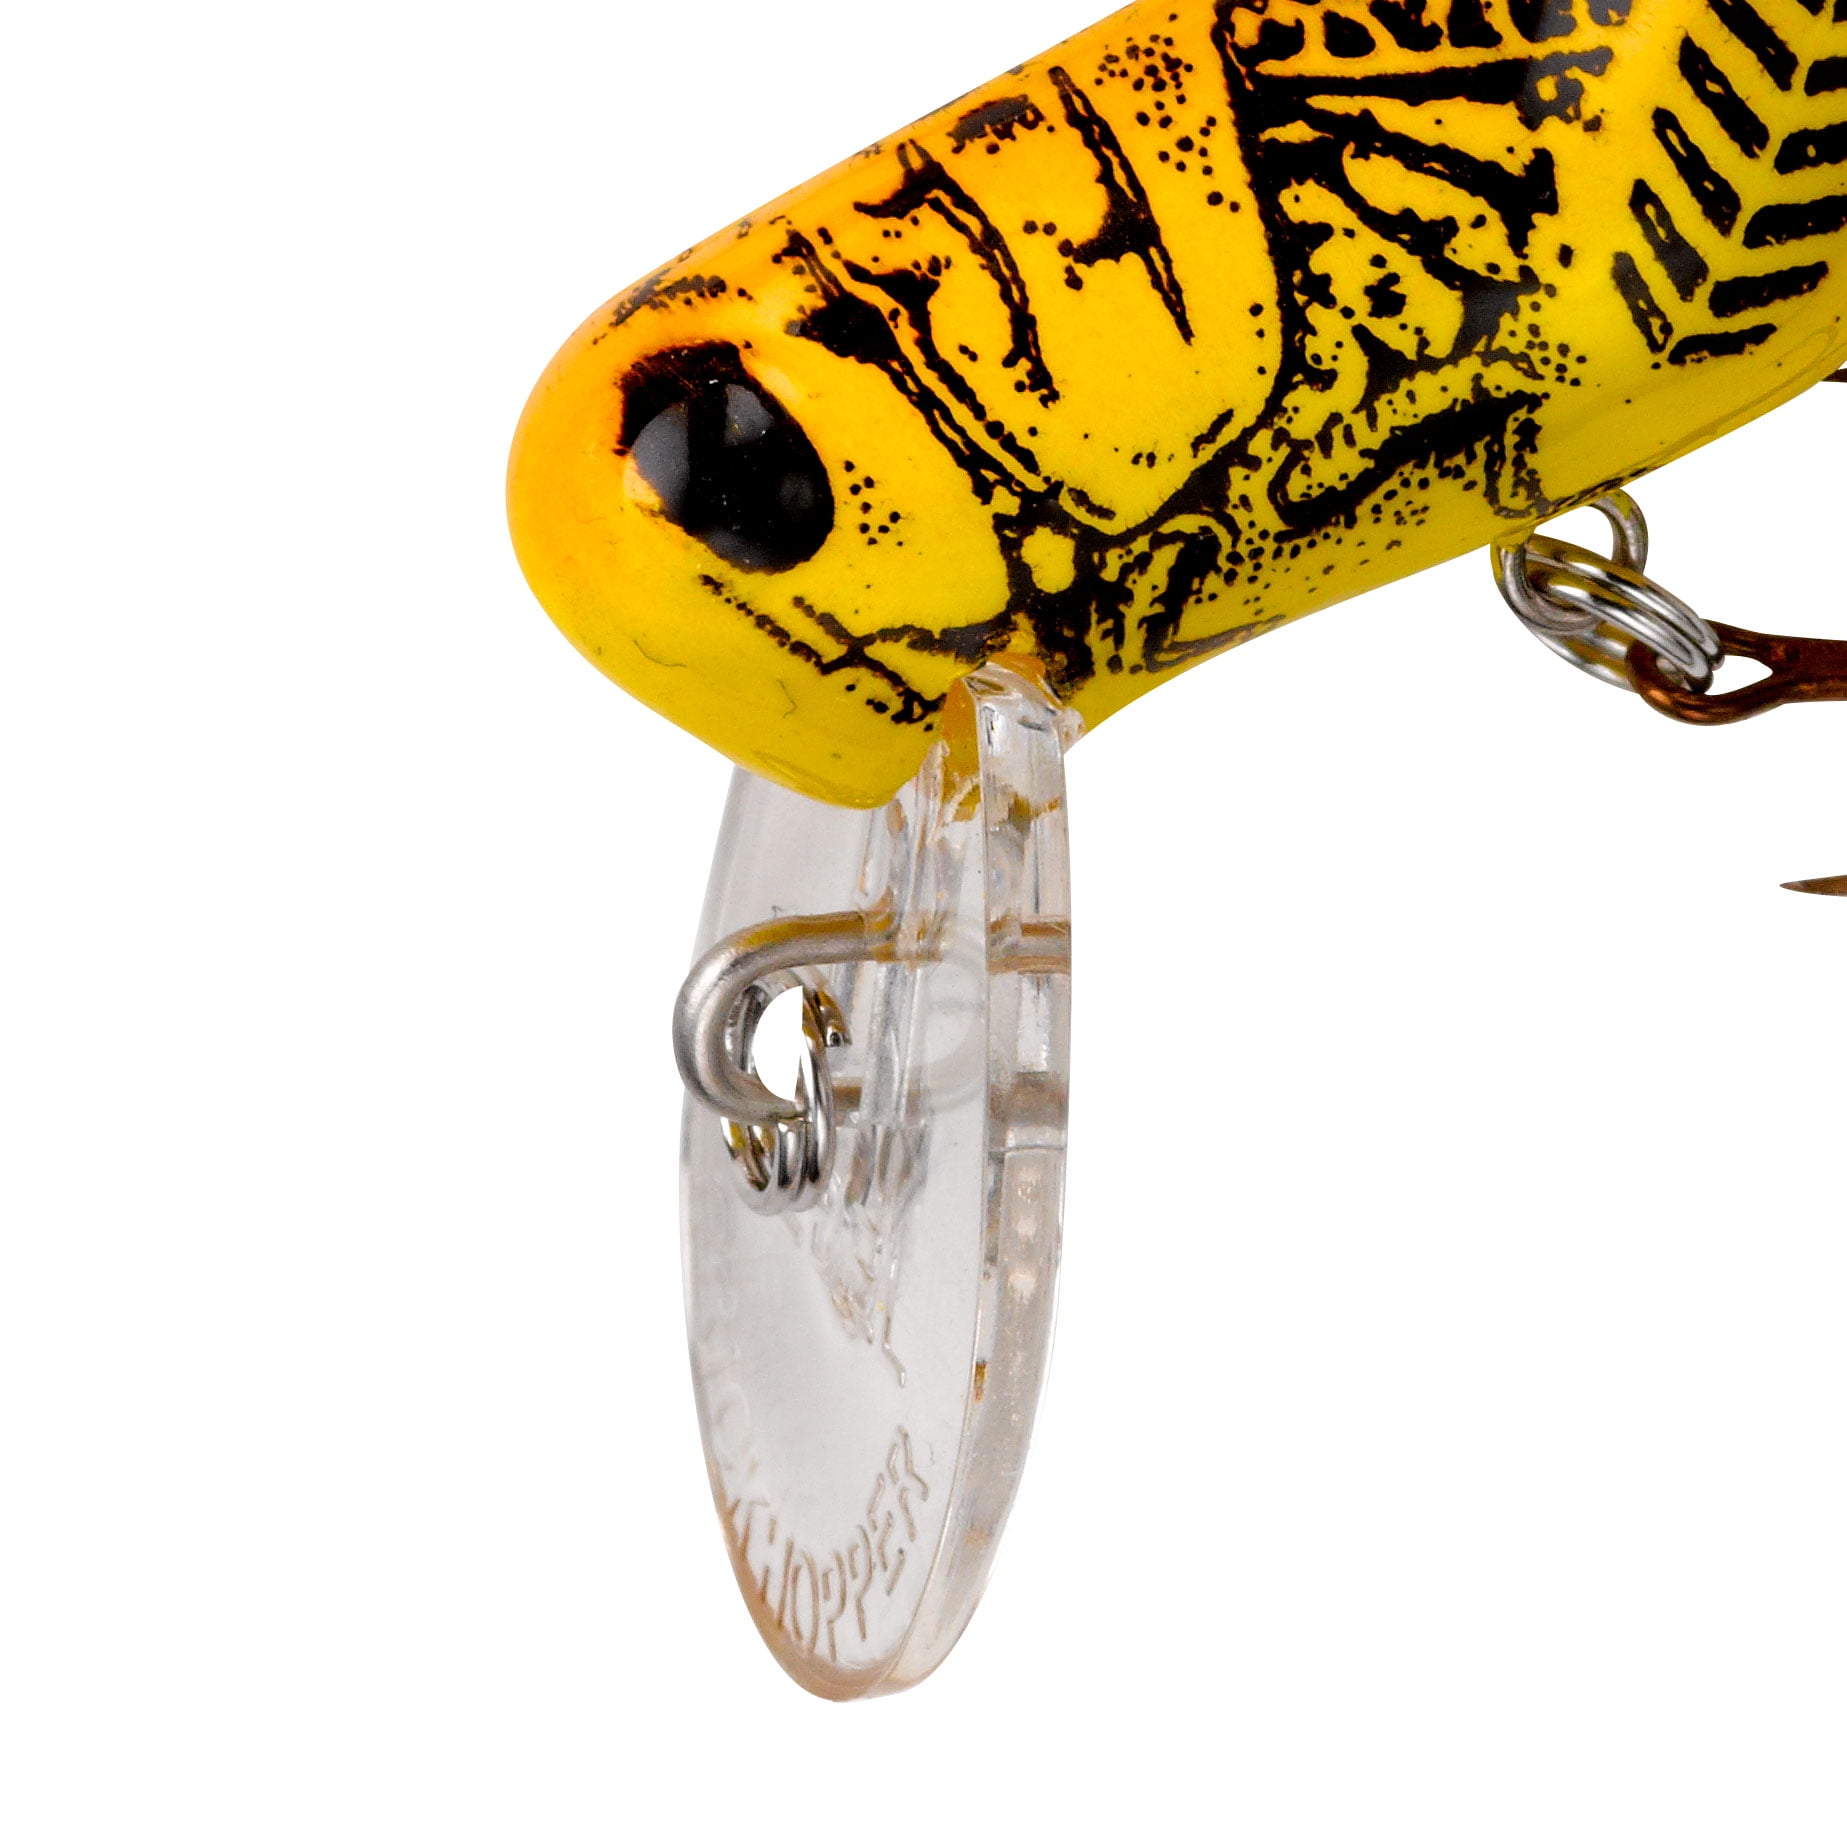  Rebel F73M95 Big Hopper, 1 3/4 1/4 oz, Brown Cricket :  Fishing Topwater Lures And Crankbaits : Sports & Outdoors